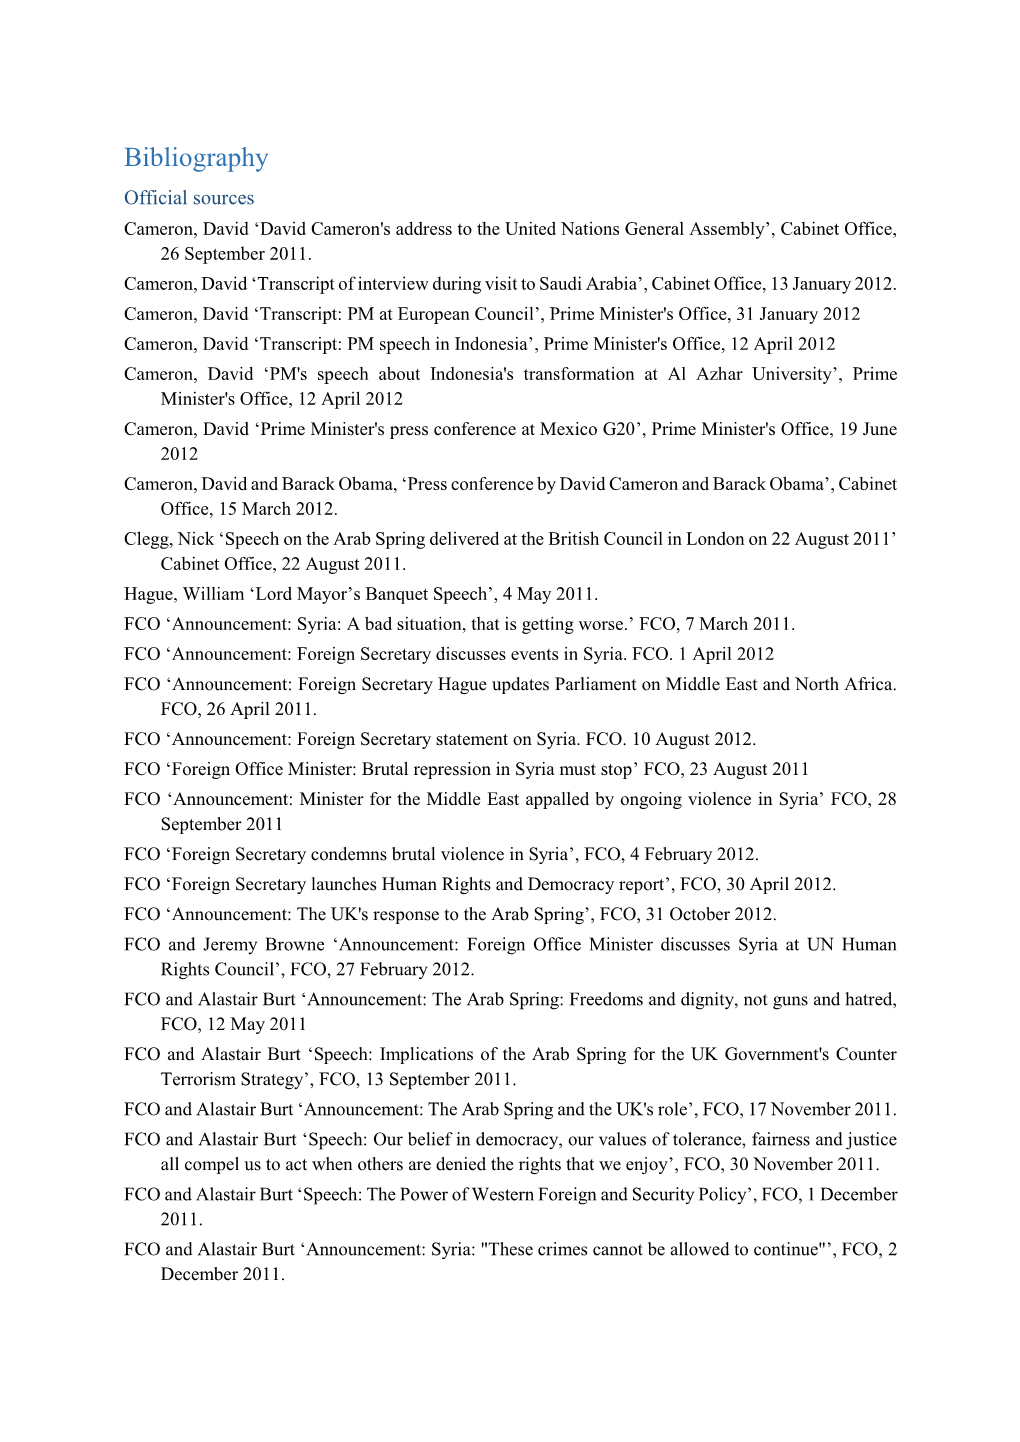 Bibliography Official Sources Cameron, David ‘David Cameron's Address to the United Nations General Assembly’, Cabinet Office, 26 September 2011